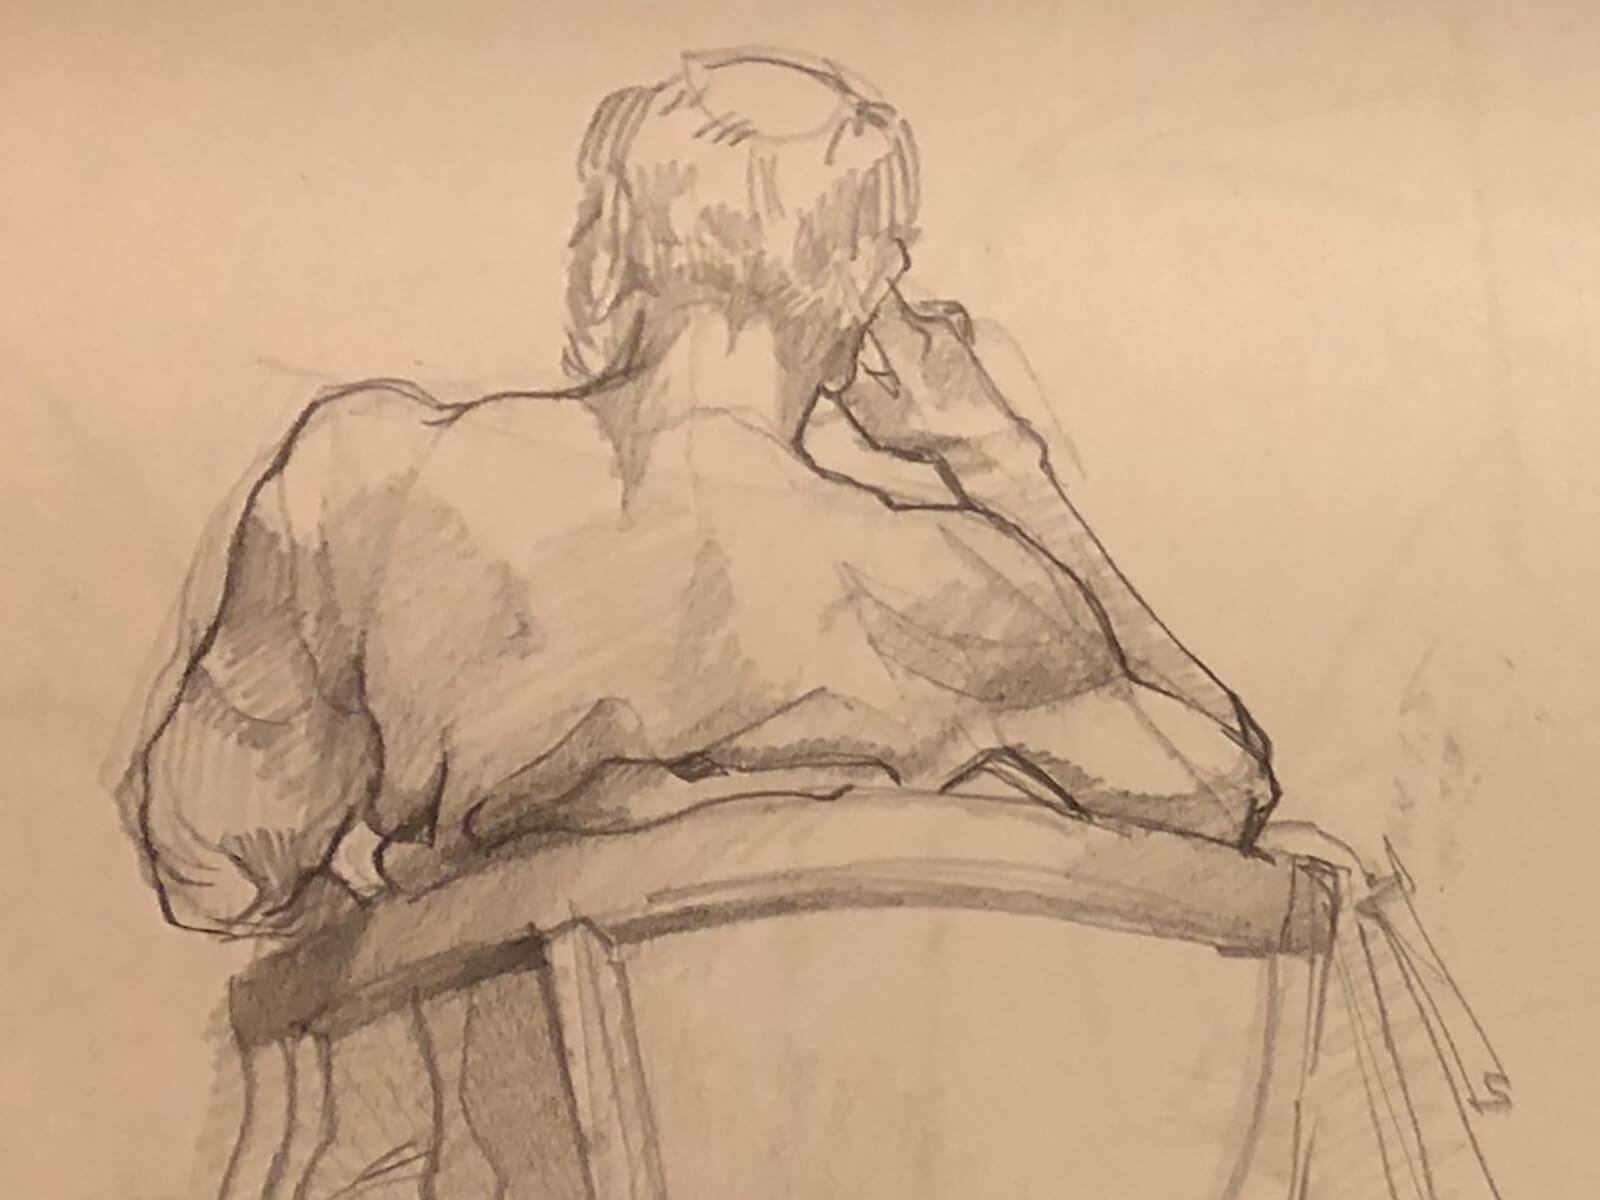 A sketch of a man sitting in a chair, his hand to his head